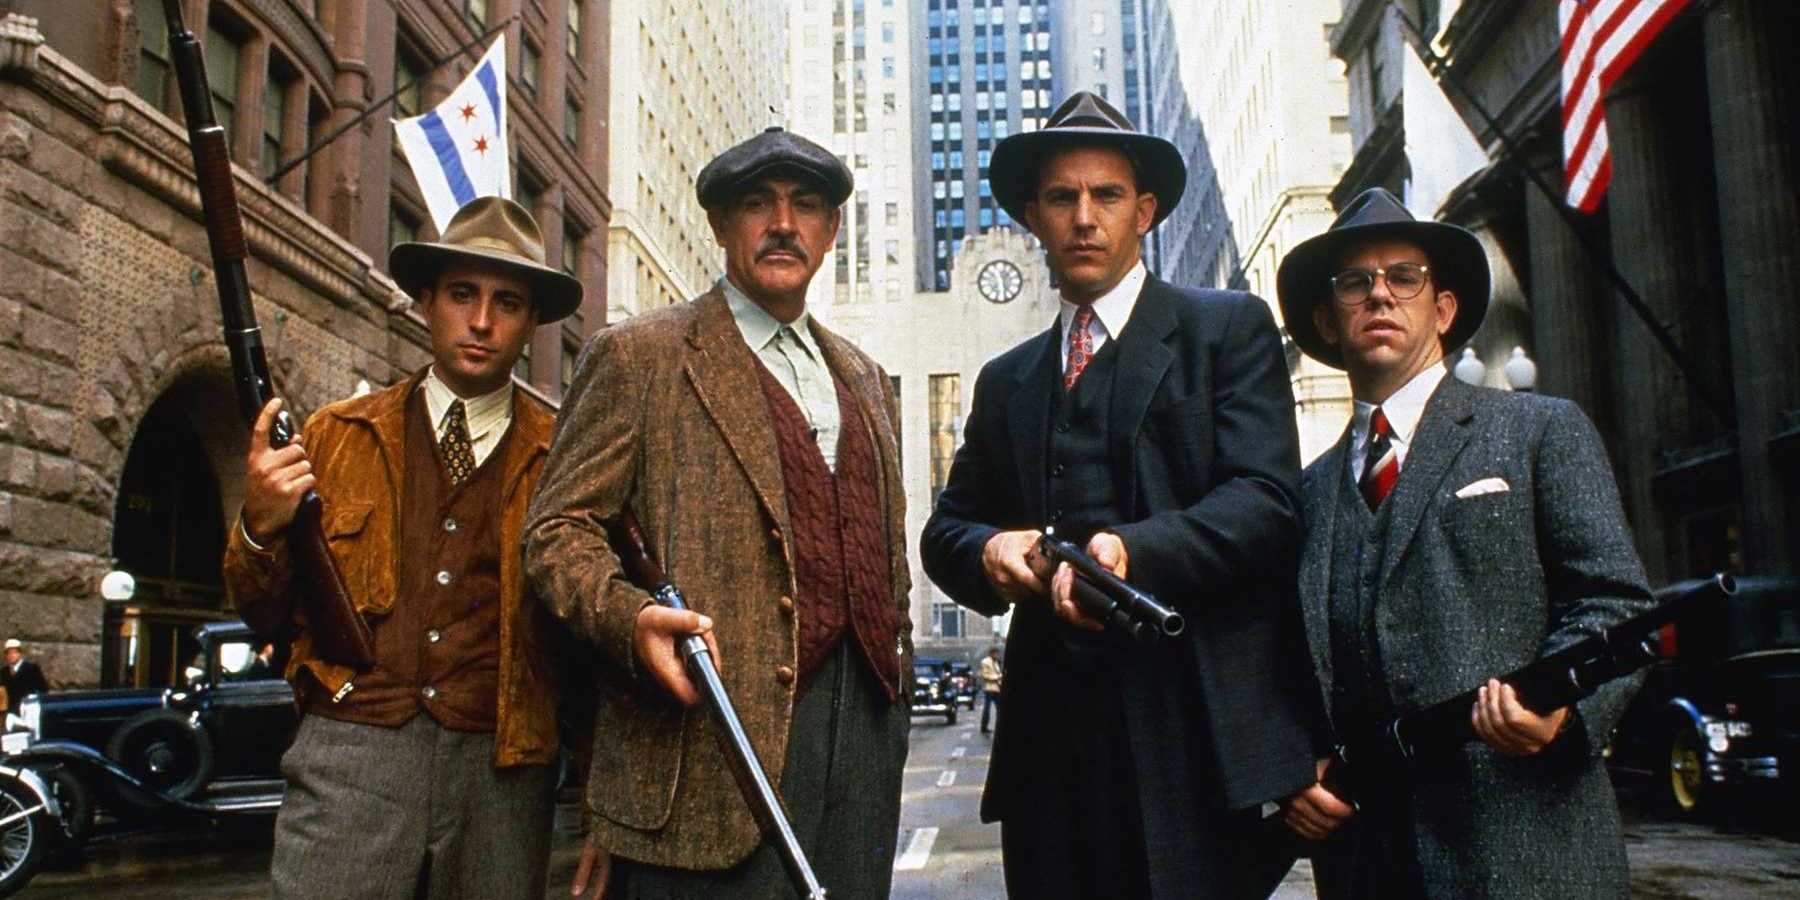 Andy-Garcia-Sean-Connery-Kevin-Costner-and-Charles-Martin-Smith-in-The-Untouchables